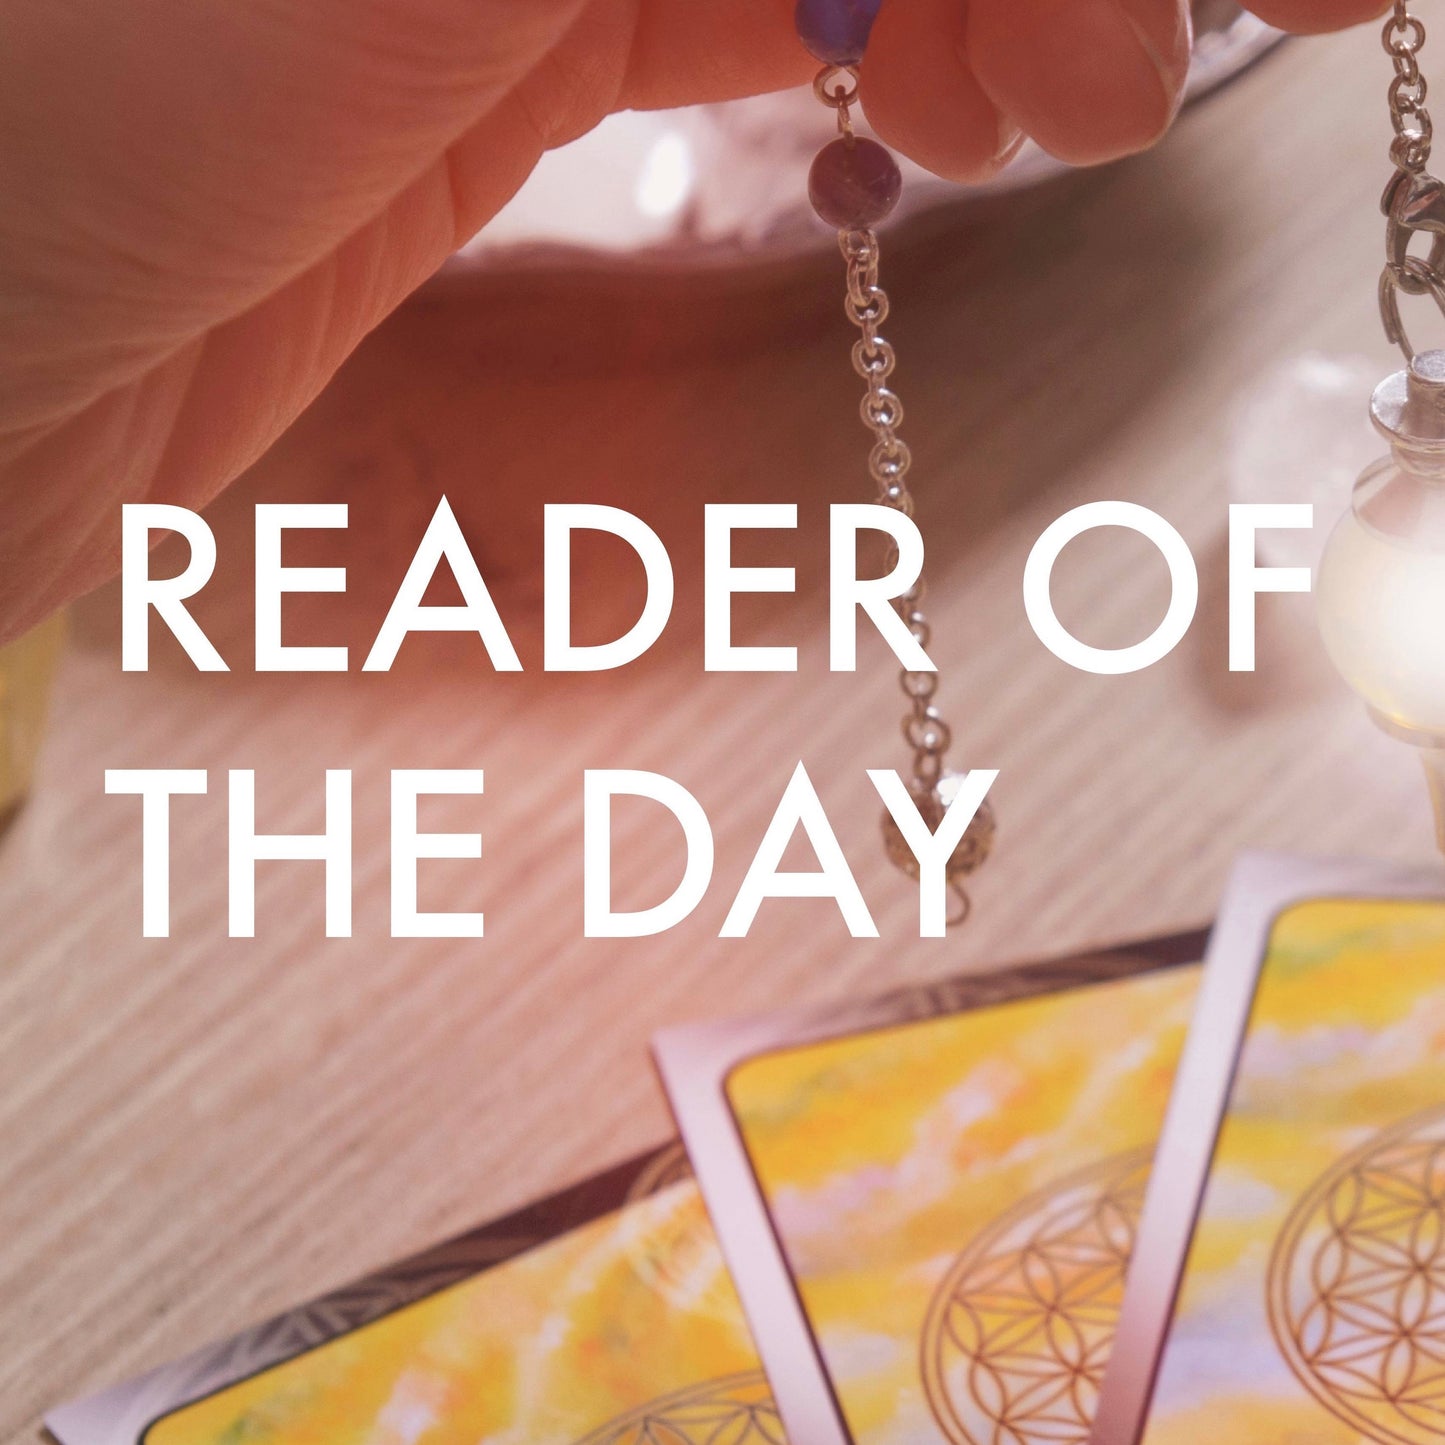 Reader of the Day - Psychic Sisters Readings